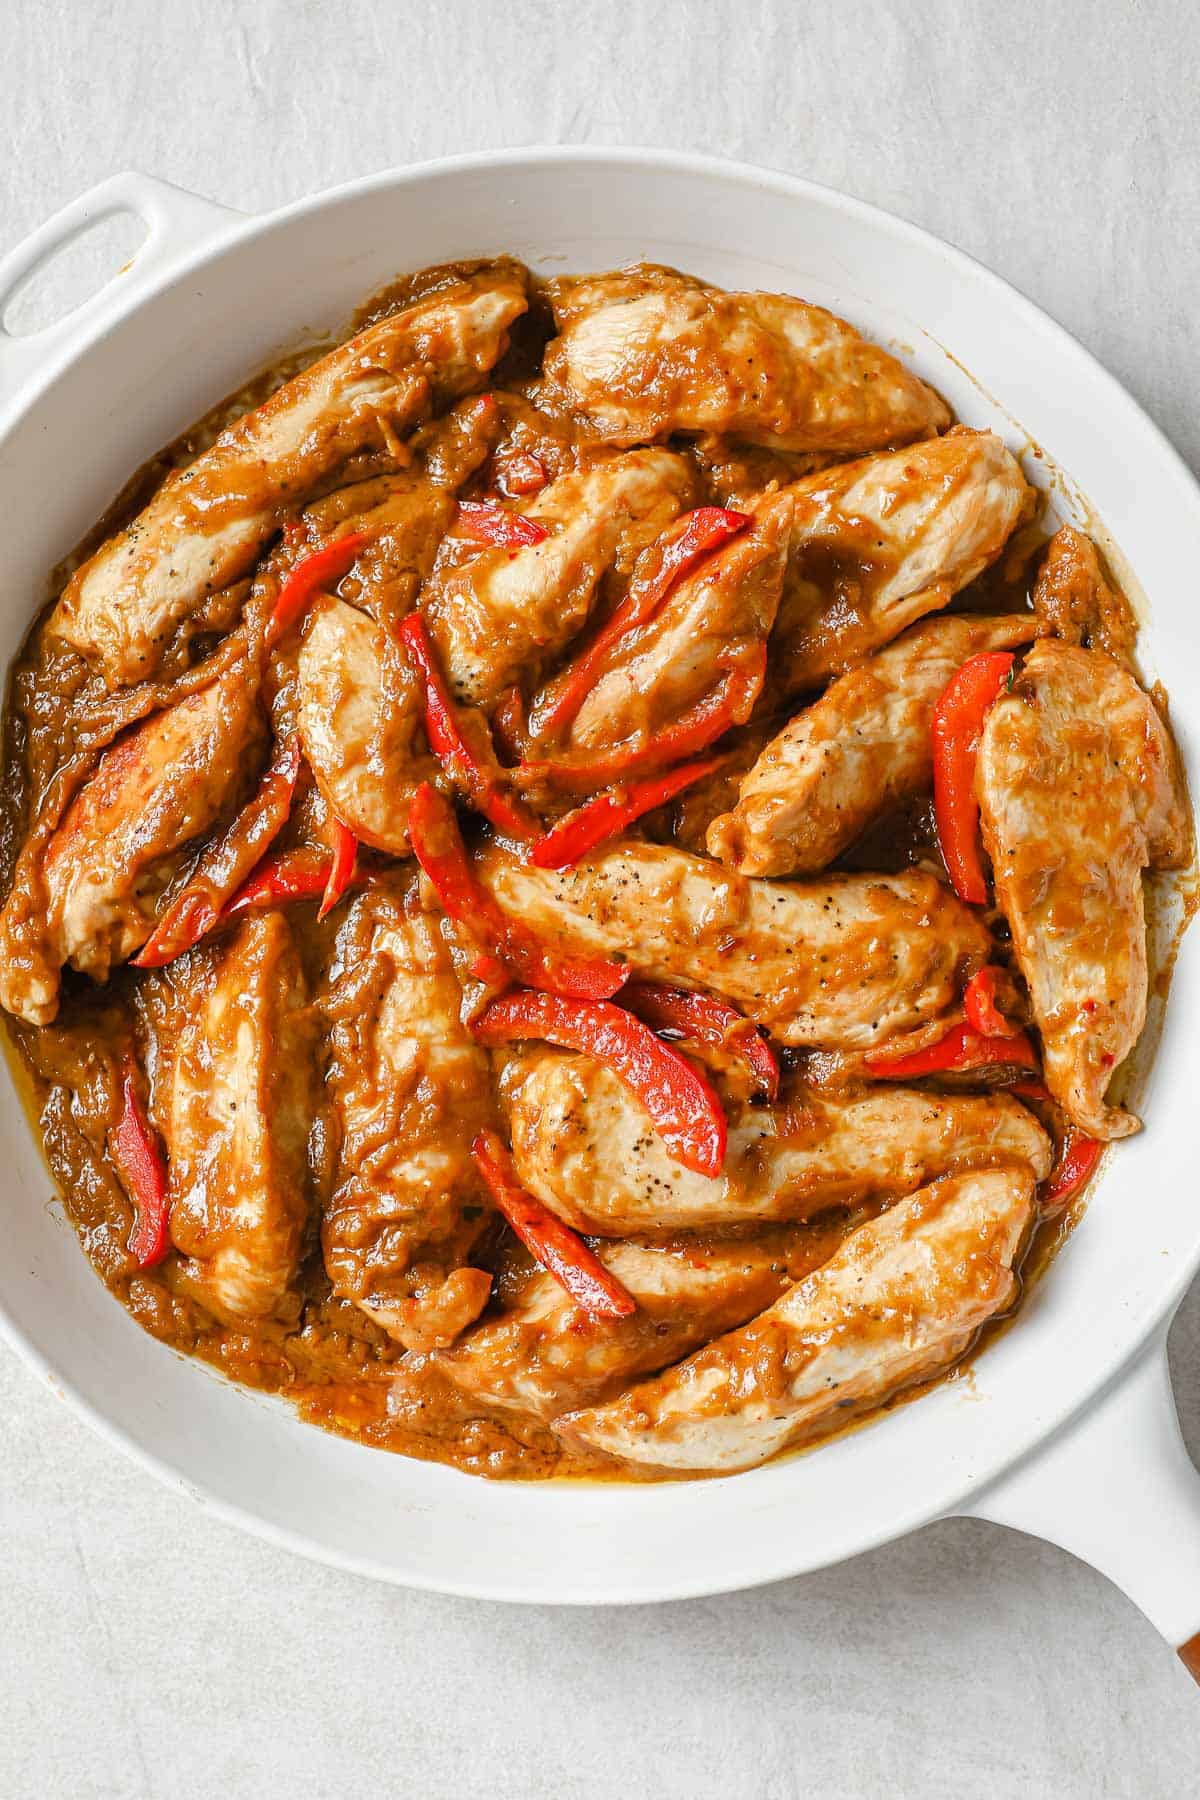 a white skillet with pan-seared chicken, red peppers, and a peanut butter sauce